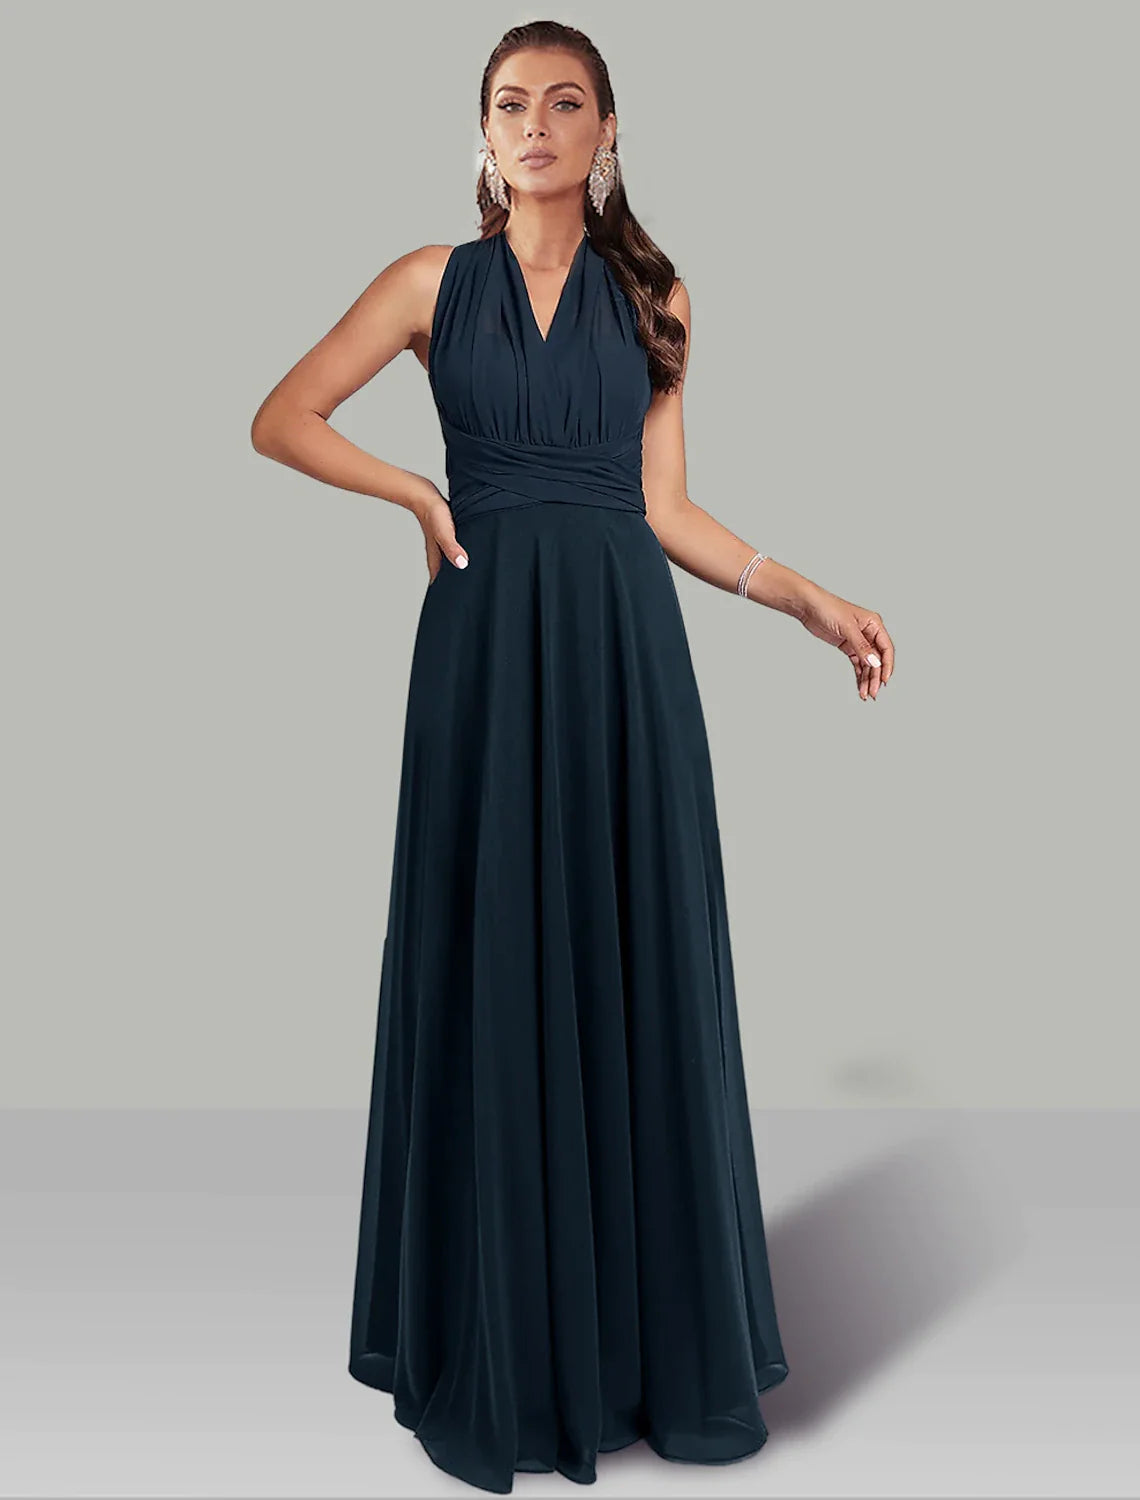 A-Line Wedding Guest Dresses Infinity Dress Wedding Party Floor Length Short Sleeve Halter Convertible Chiffon with Ruched